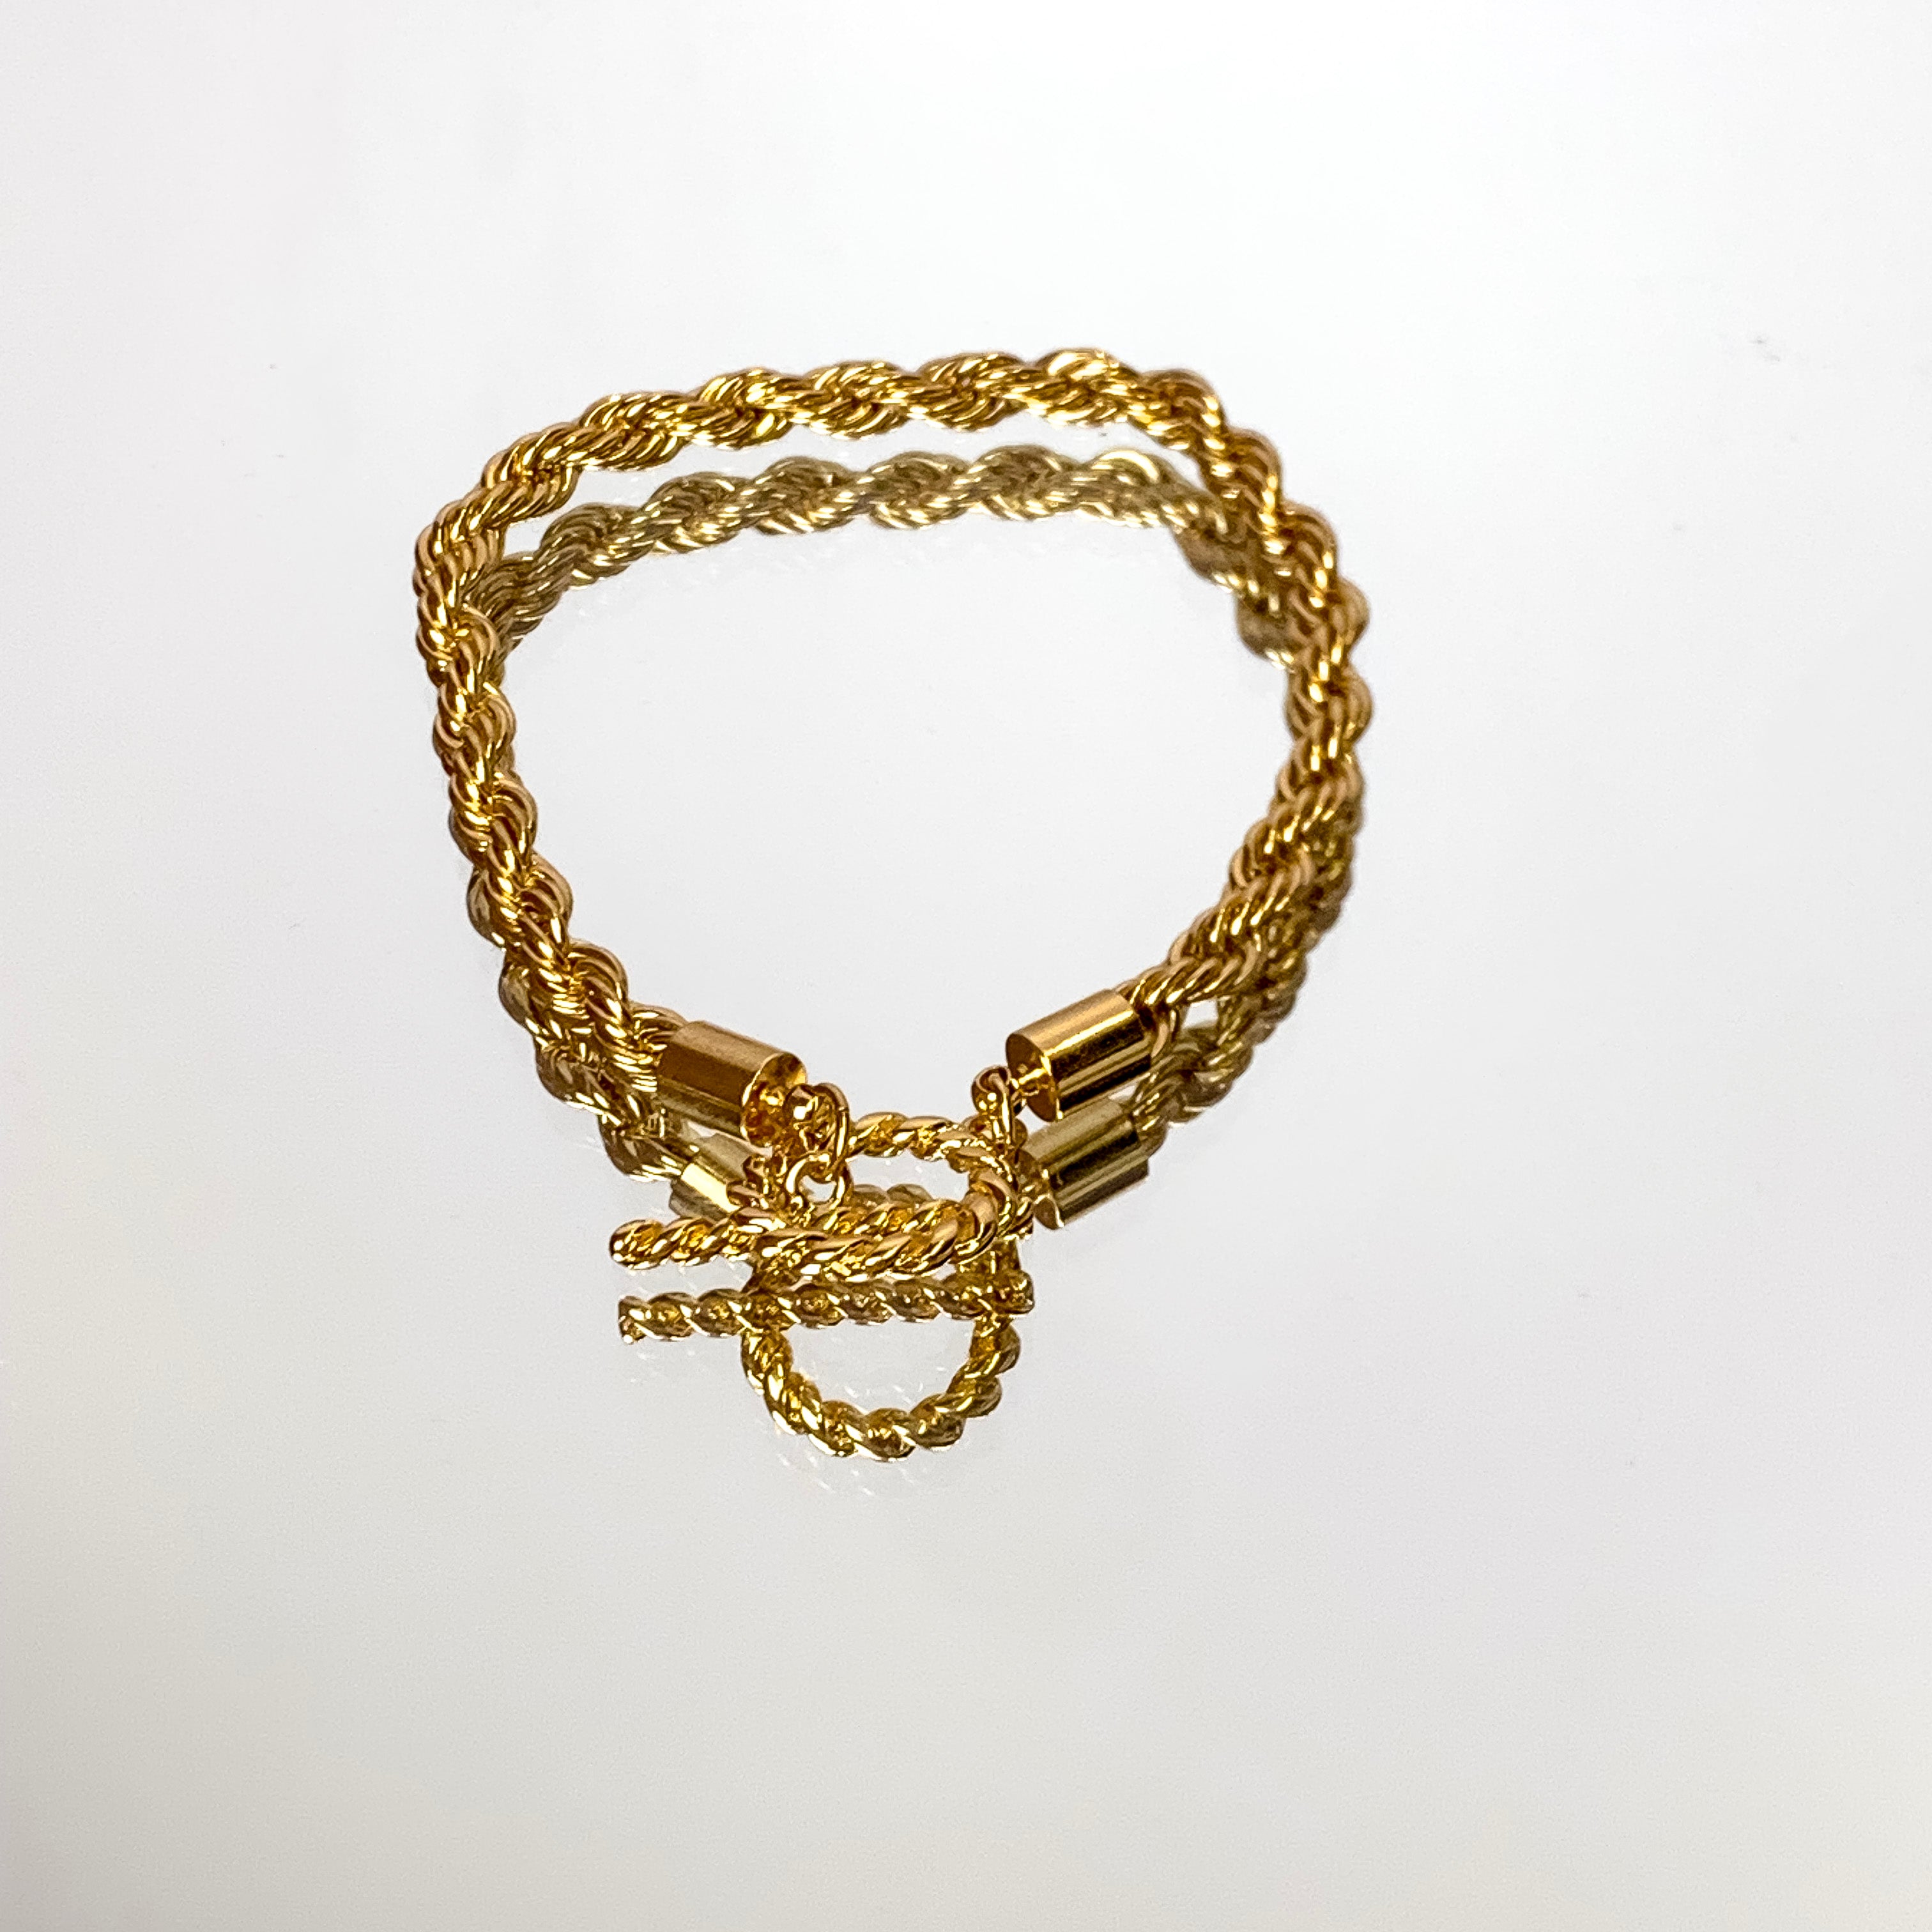 Gold Tone Rope Chain Toggle Bracelet - Giddy Up Glamour Boutique